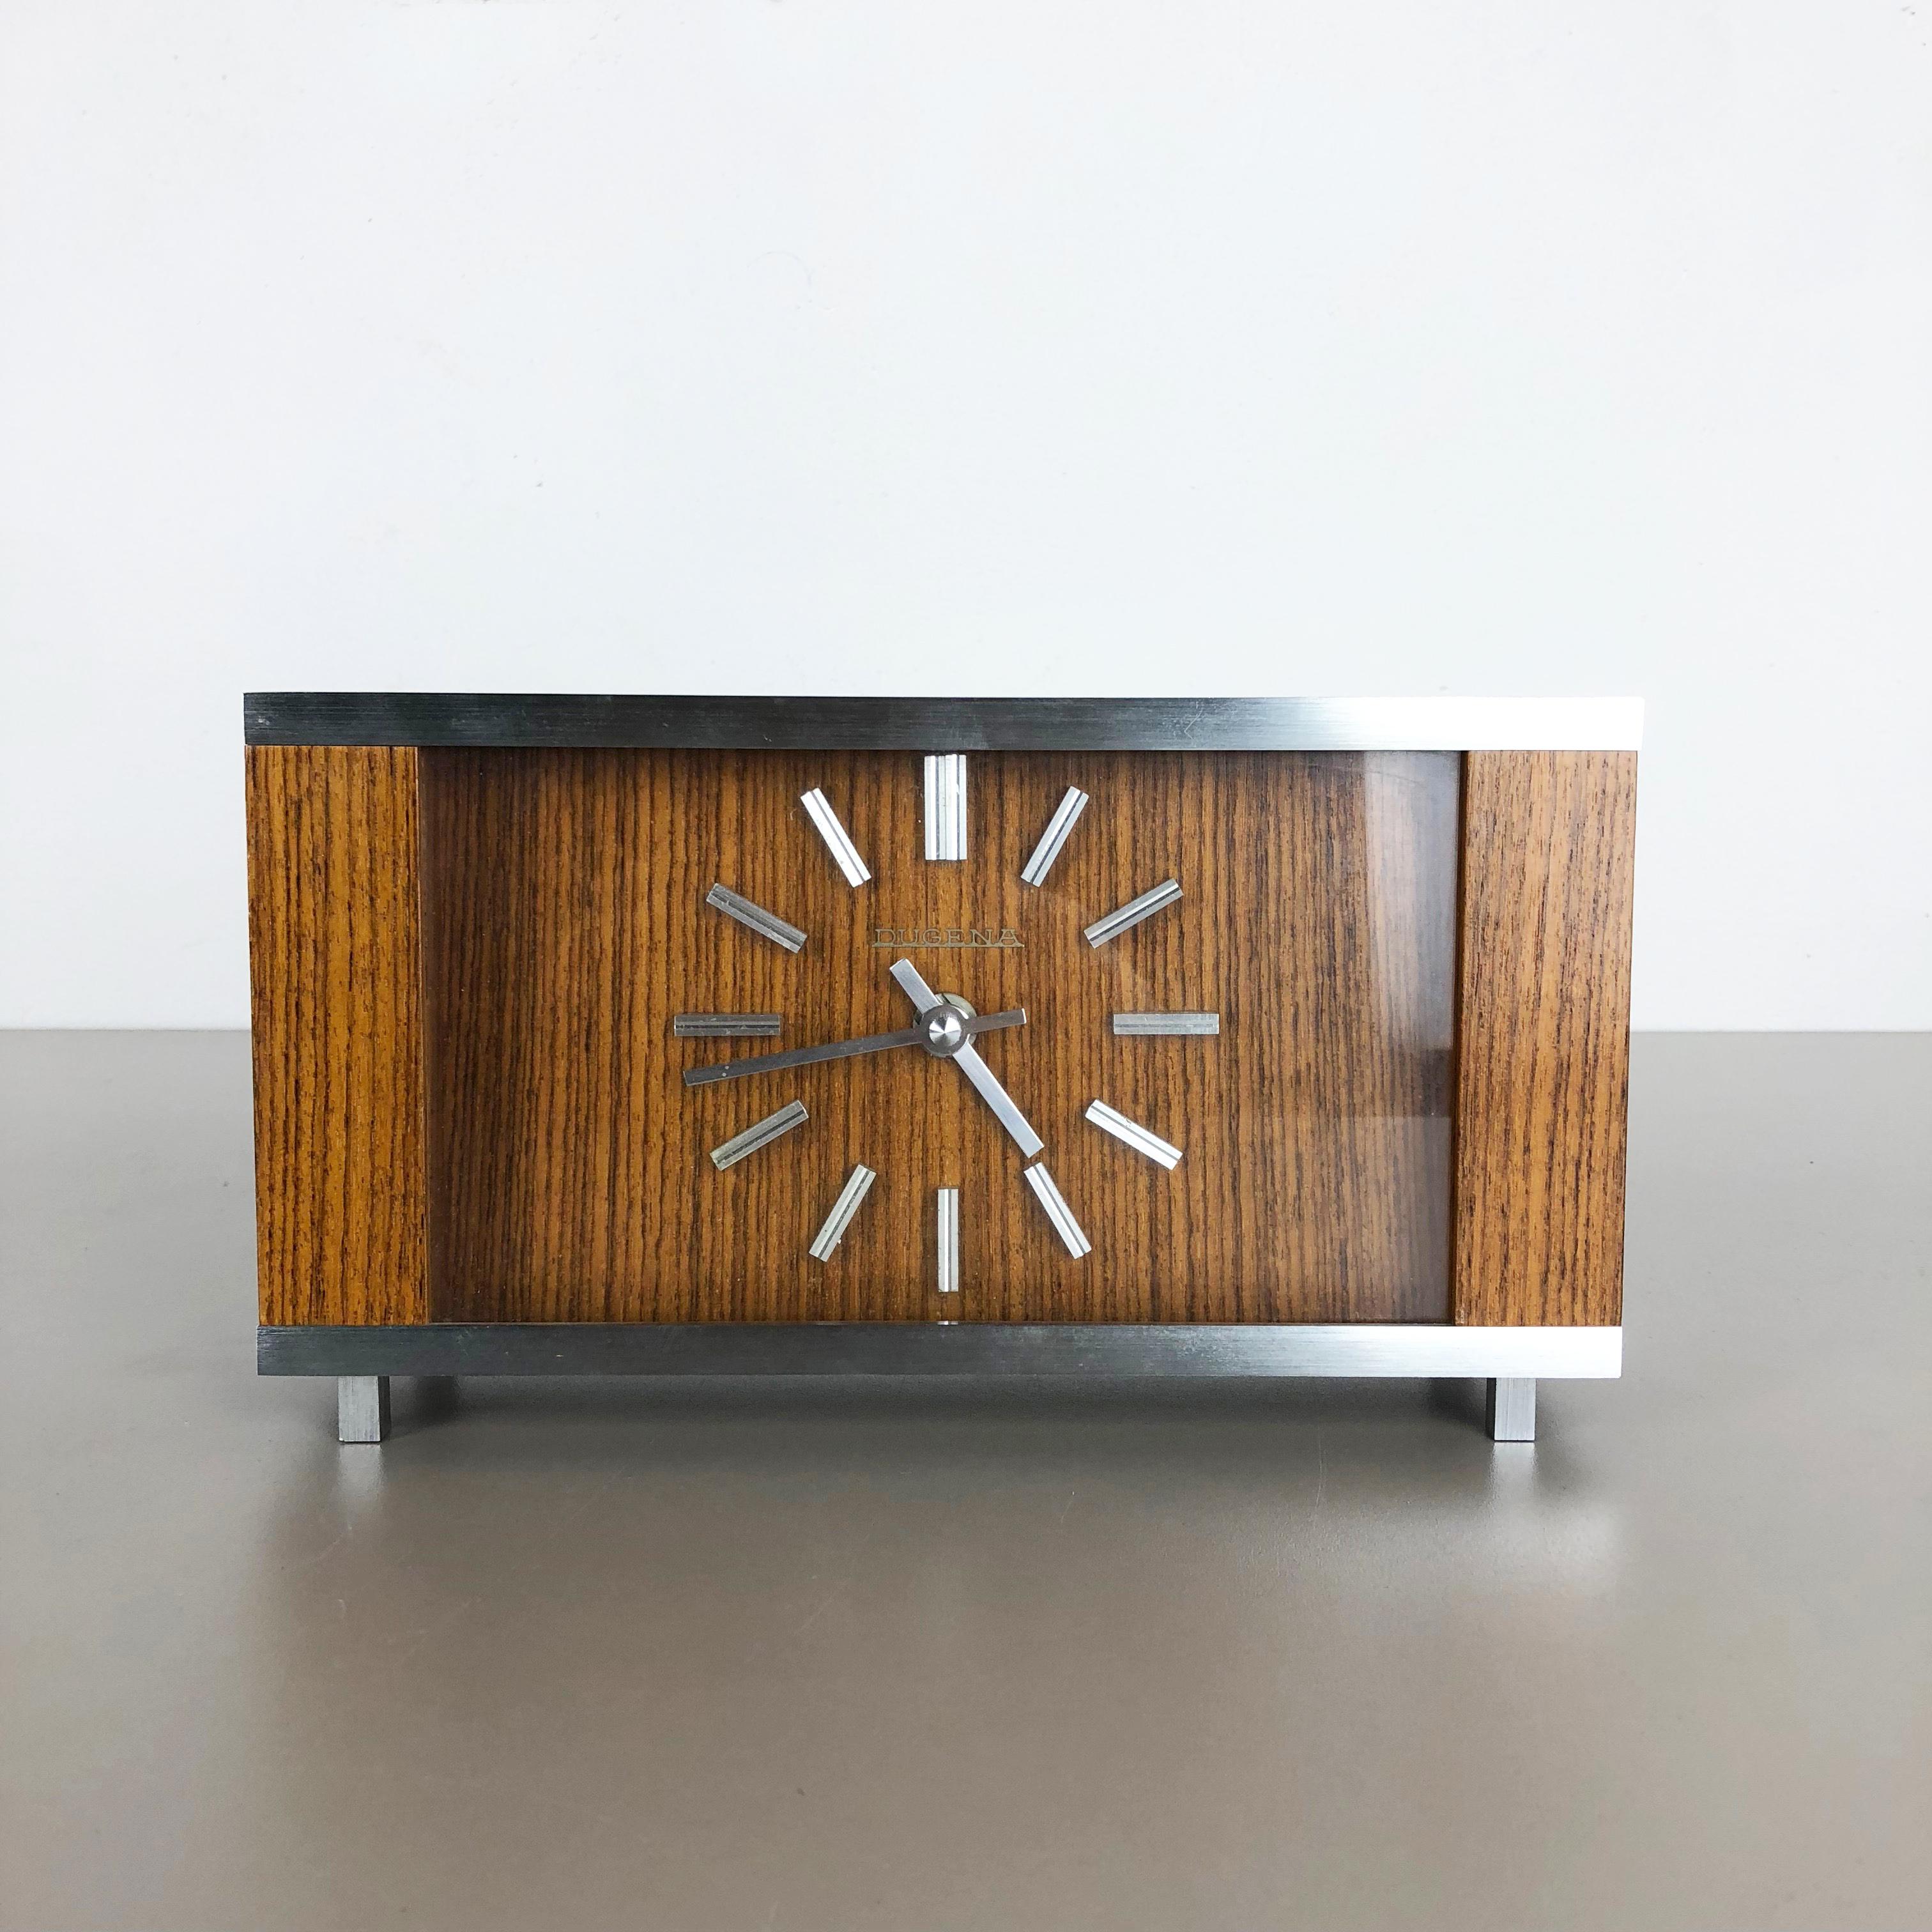 ARTICLE:

table clock



ORIGIN:

Germany


PRODUCER:

DUGENA


AGE:

1960s



DESCRIPTION:

this original wooden table clock was produced in the 1960s by the premium clock producer DUGENA in Germany. The clock is original